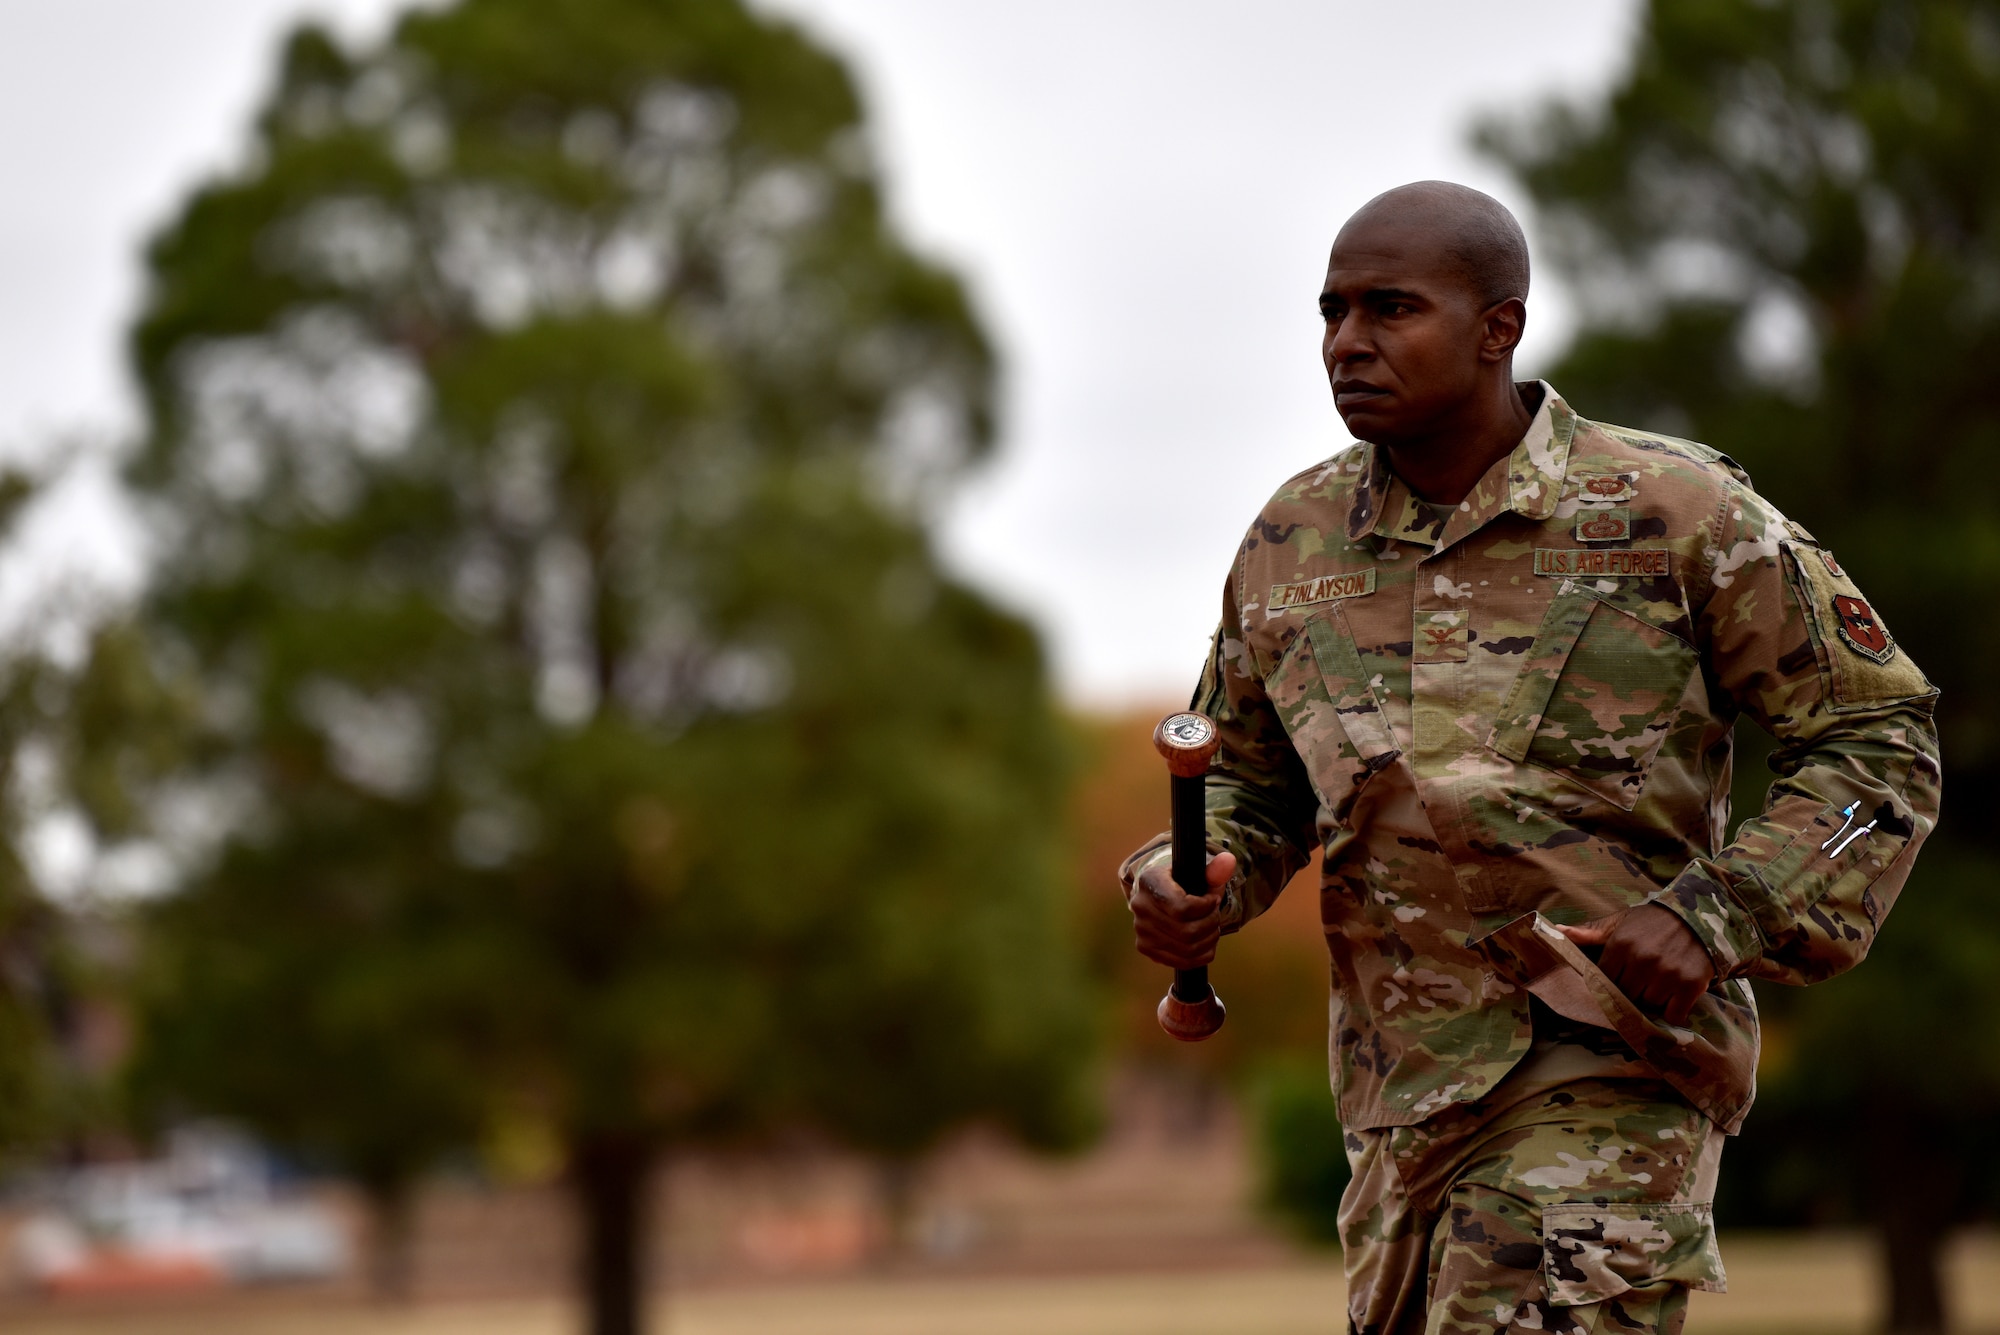 U.S. Air Force Col. James Finlayson, 17th Training Wing vice commander, runs the final stretch of the Mathis Fitness Center track during the Prisoner of War and Missing in Action 24 hour remembrance run on Goodfellow Air Force Base, Texas, Nov. 13, 2020. After each participant finished their running time they handed off the baton to the next member. (U.S. Air Force photo by Staff Sgt. Seraiah Wolf)